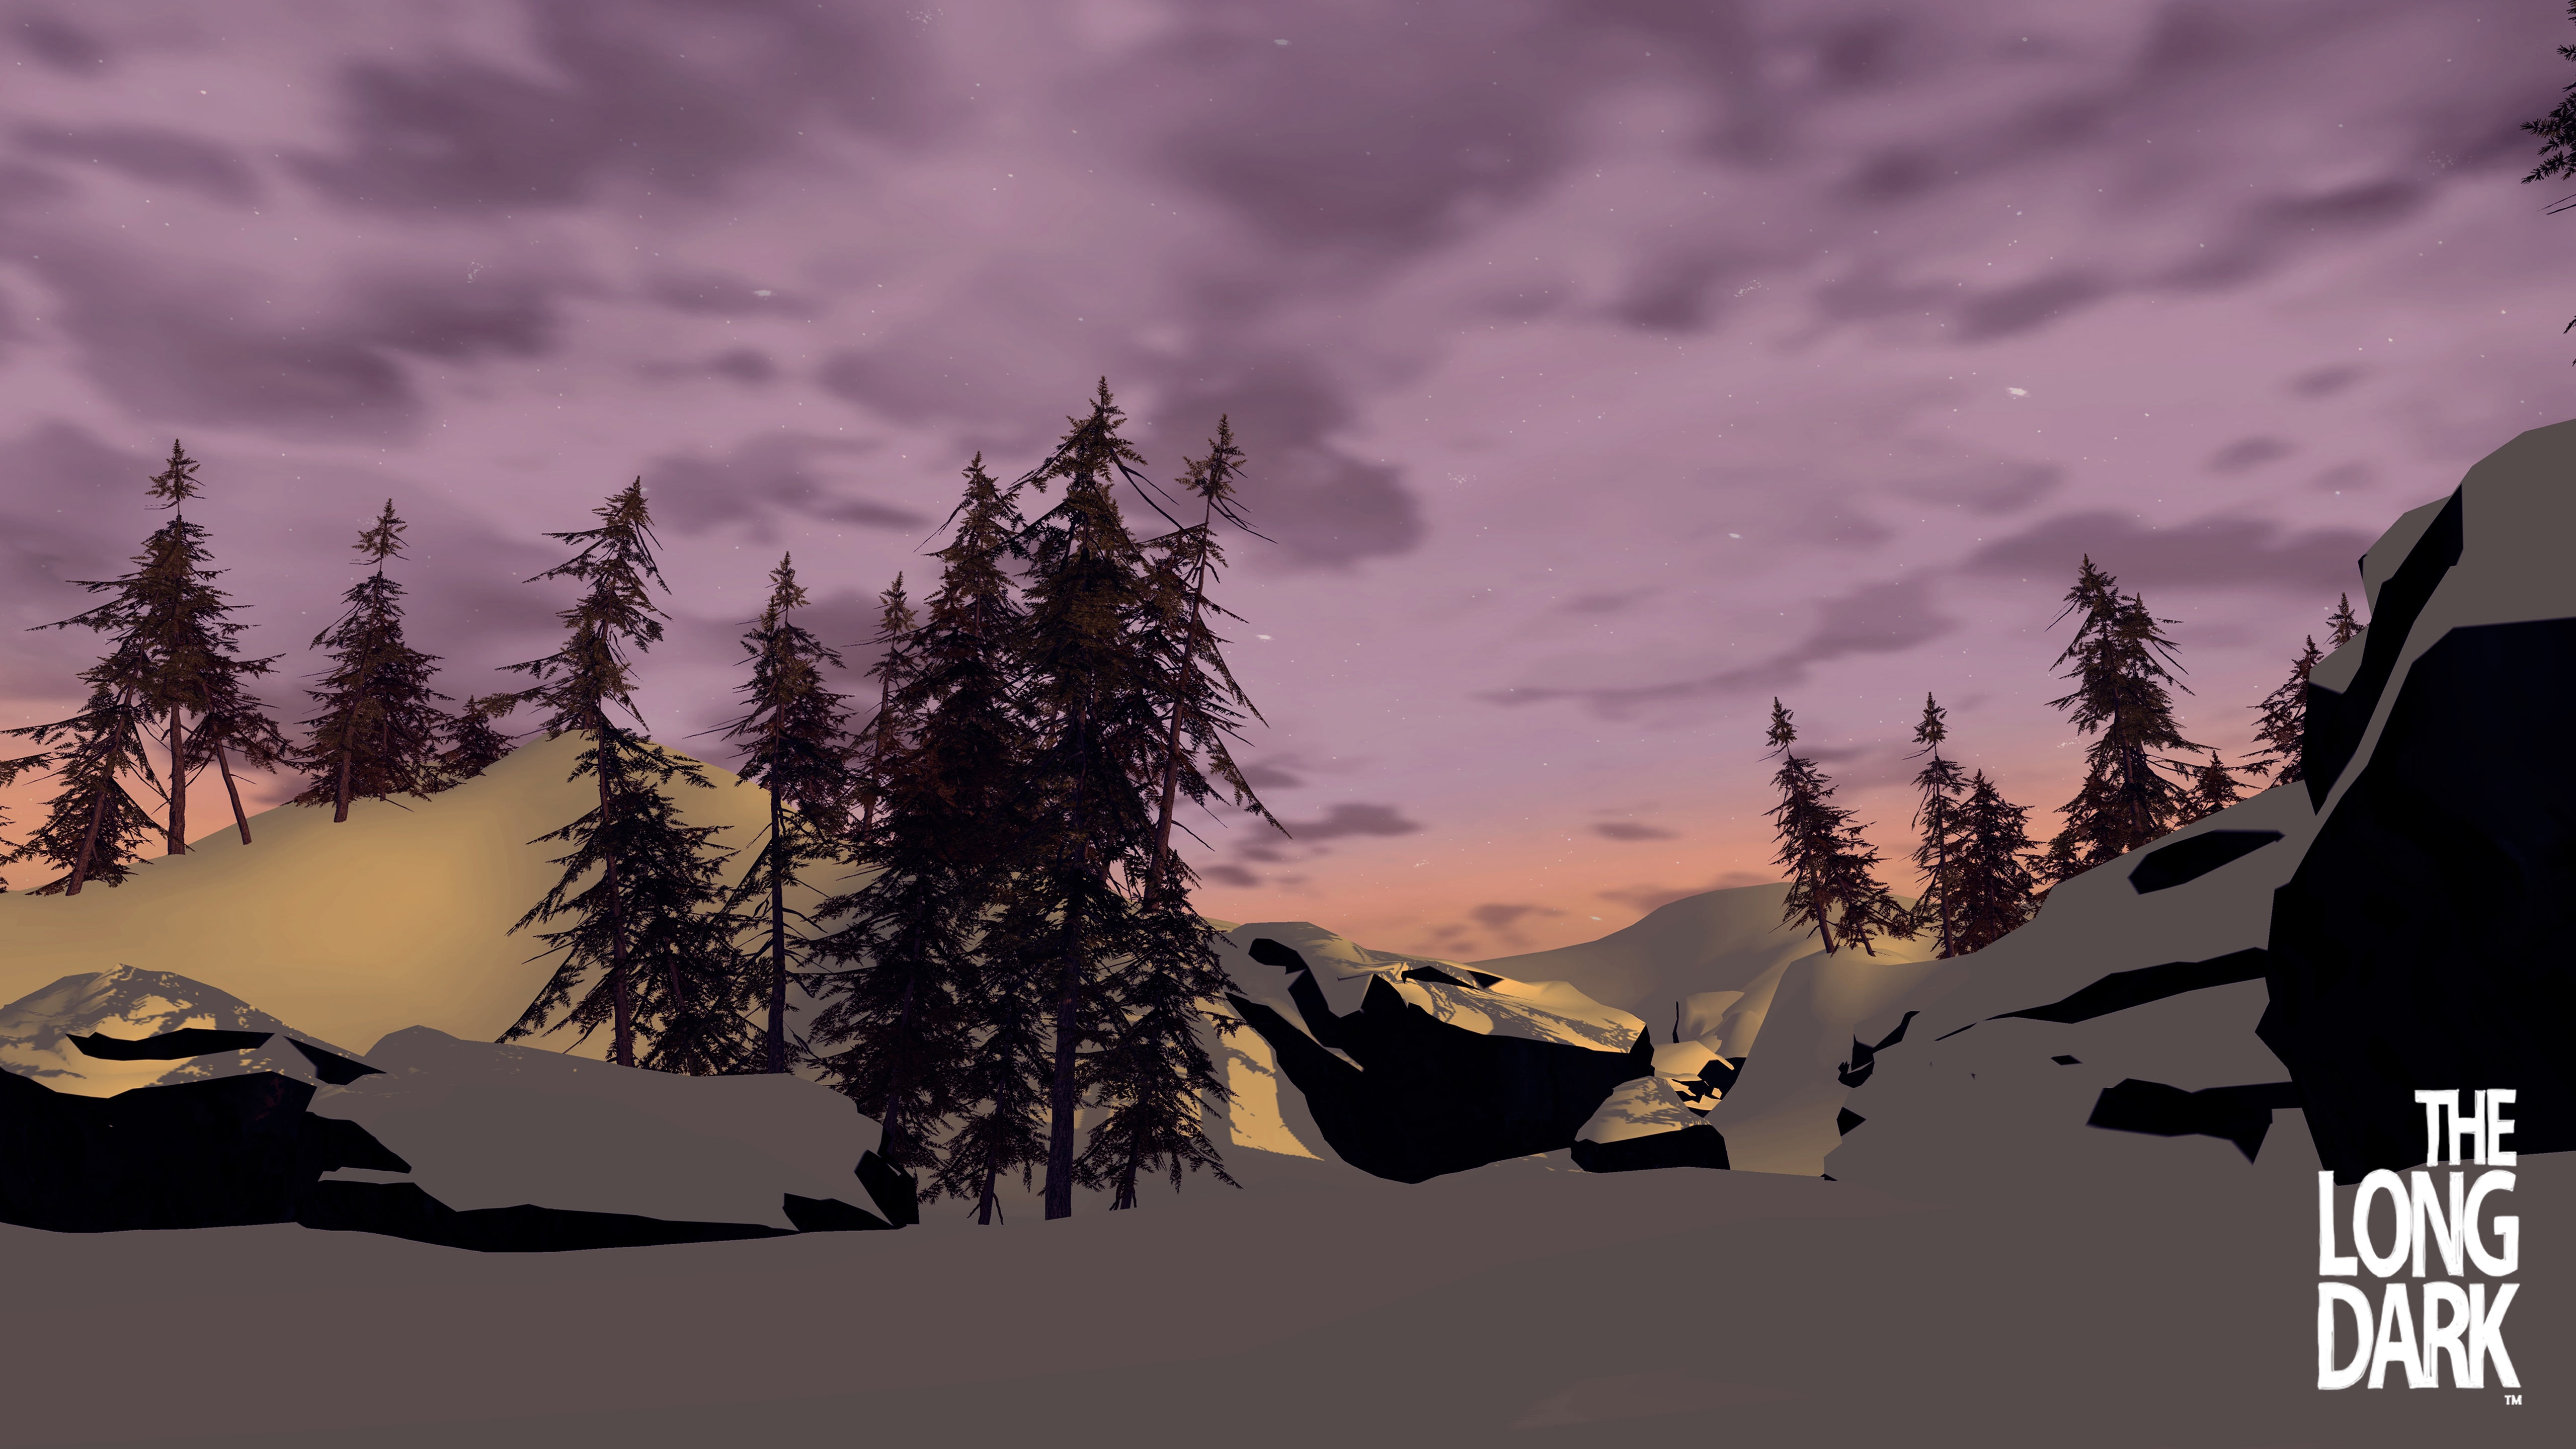 the long dark, video game